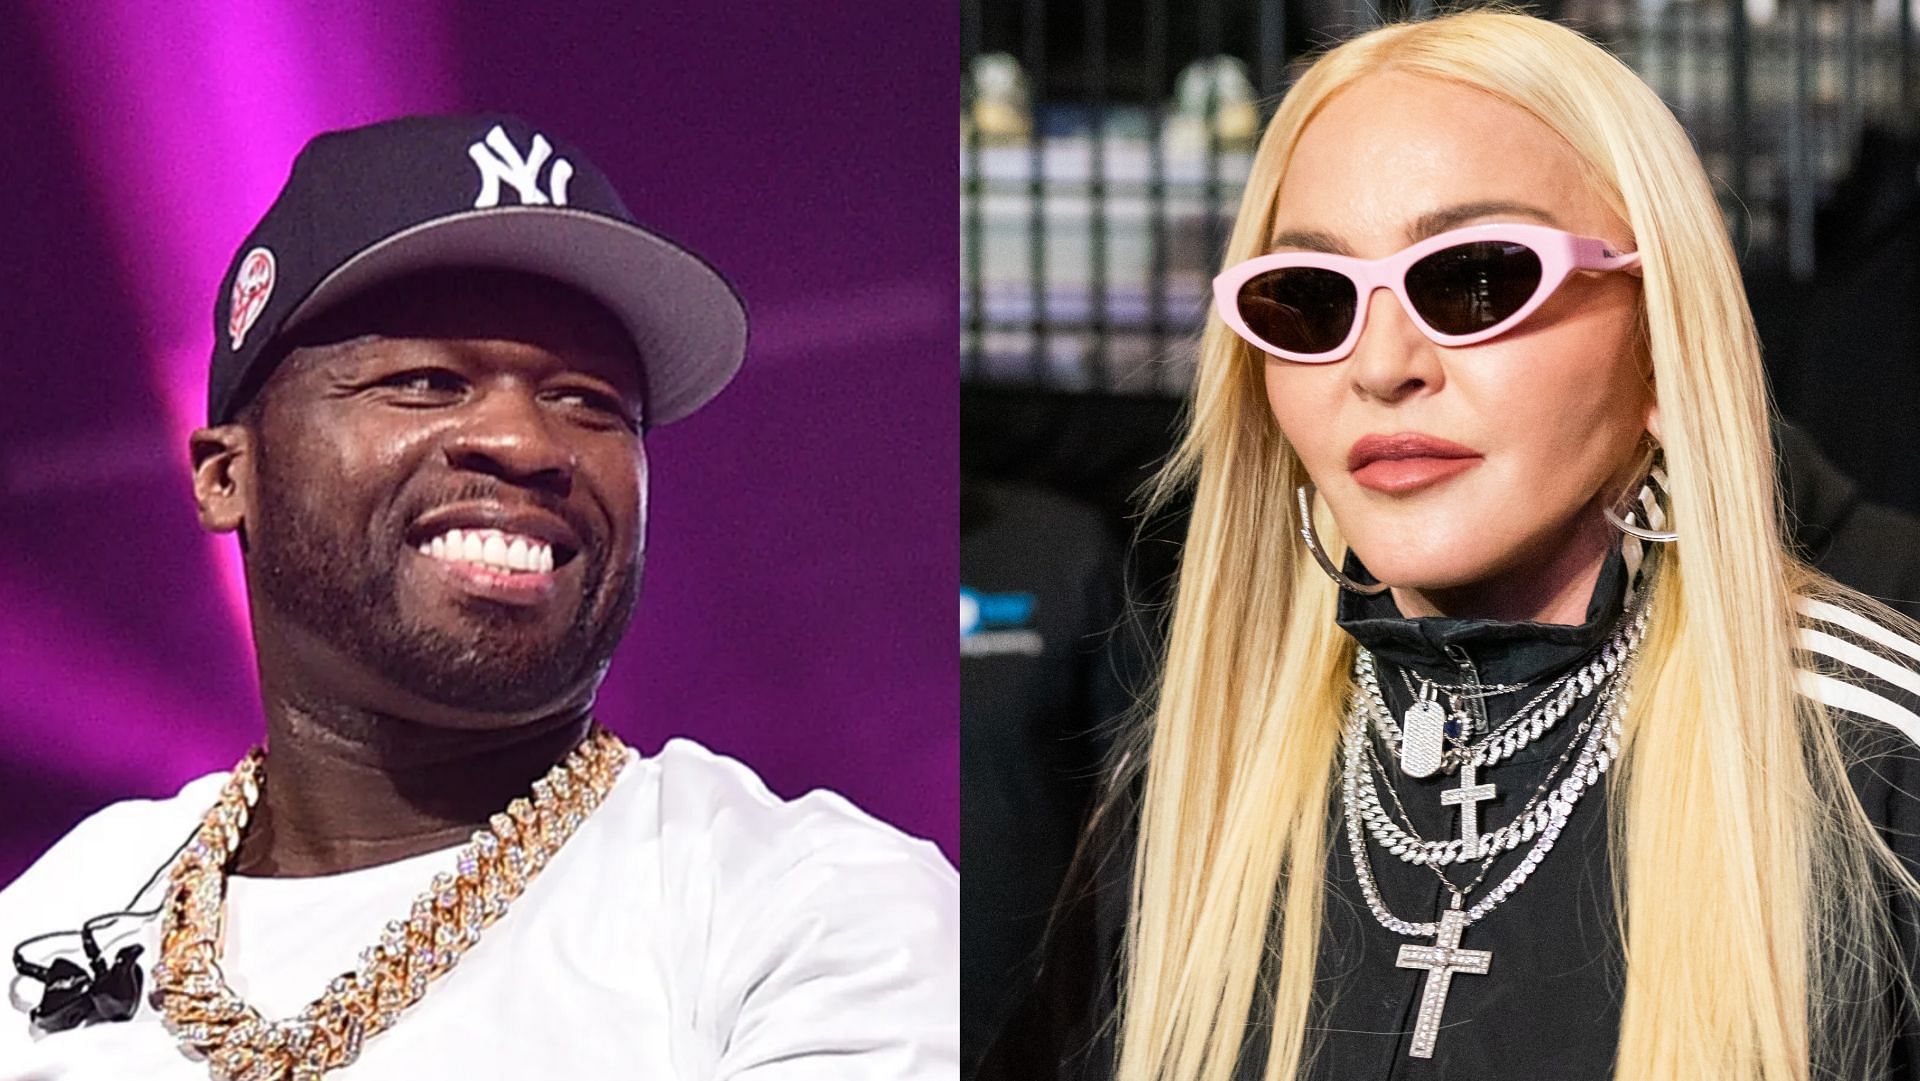 50 Cent has previously called out Madonna for her social media activities. (Image via Jordan Darville/Getty, Cassy Athena/Getty Images)